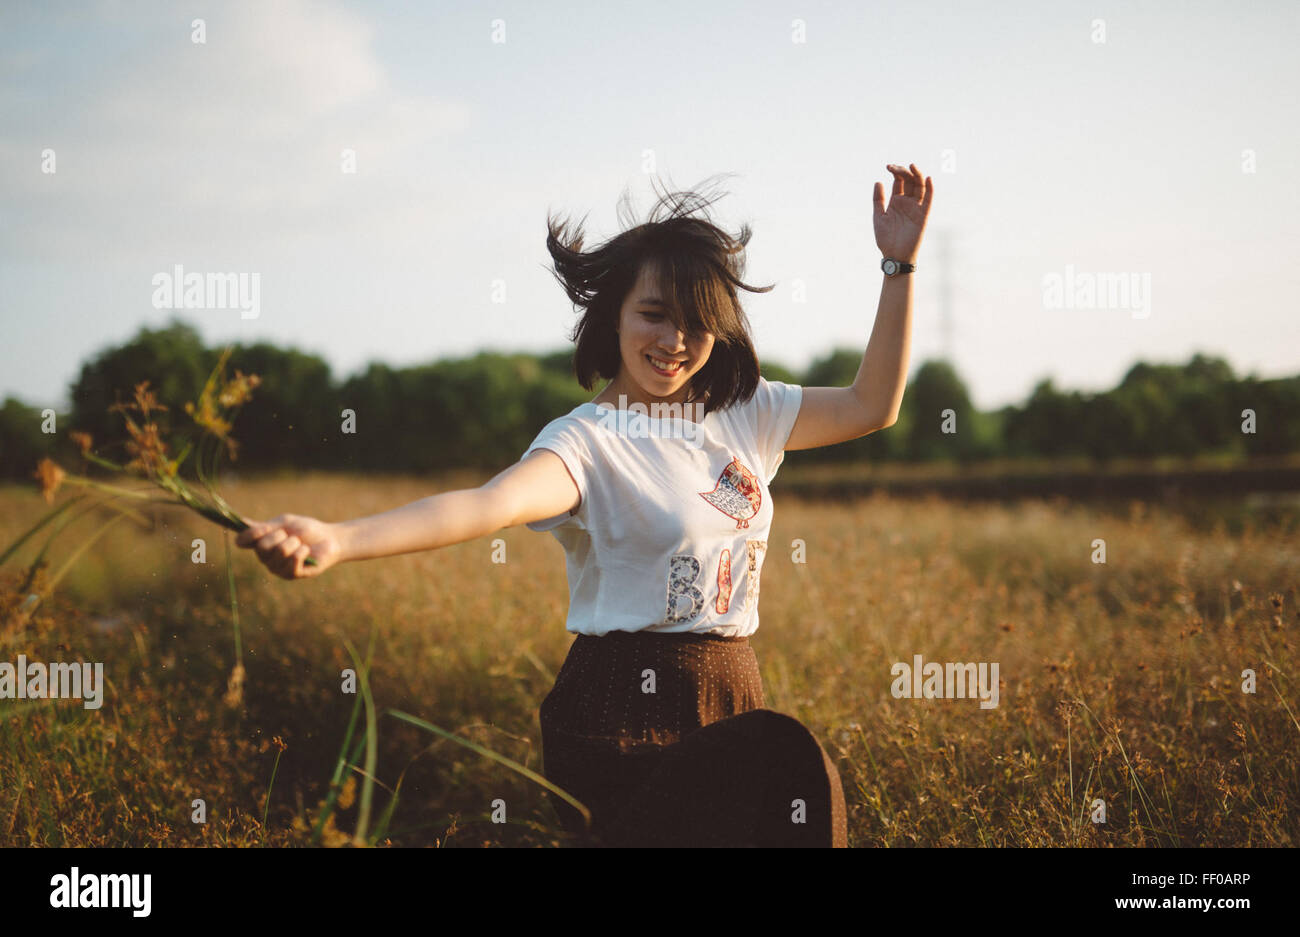 Female Holding Flowers Dancing in Field Stock Photo